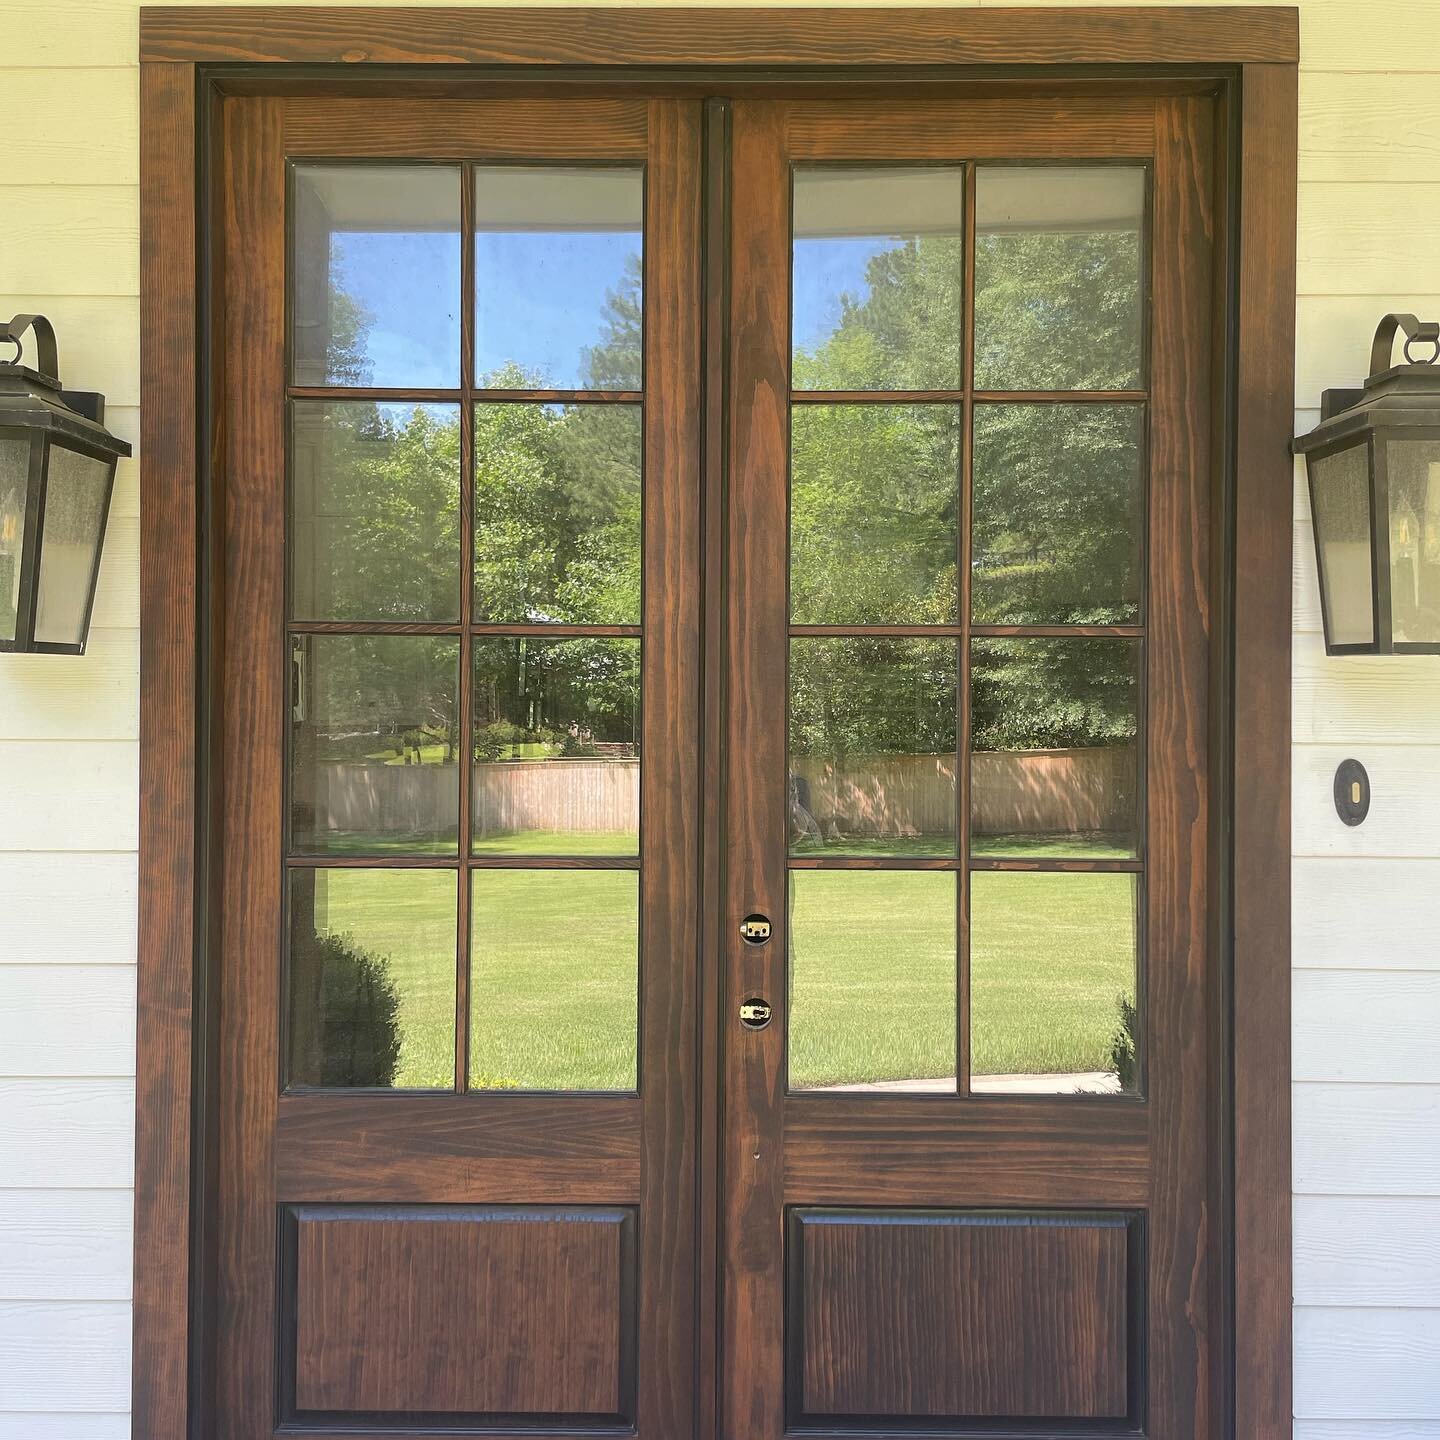 Happy Hump Day! Nothing like a little #beforeandafter to get you through the day!
&bull;
&bull;
&bull;
#frontdoorrefinish #wooddoor #staineddoor #beforeandafter #renovations #exterior #maxwellrenovations #maxwellrenovationsproject #exteriordoor #fron